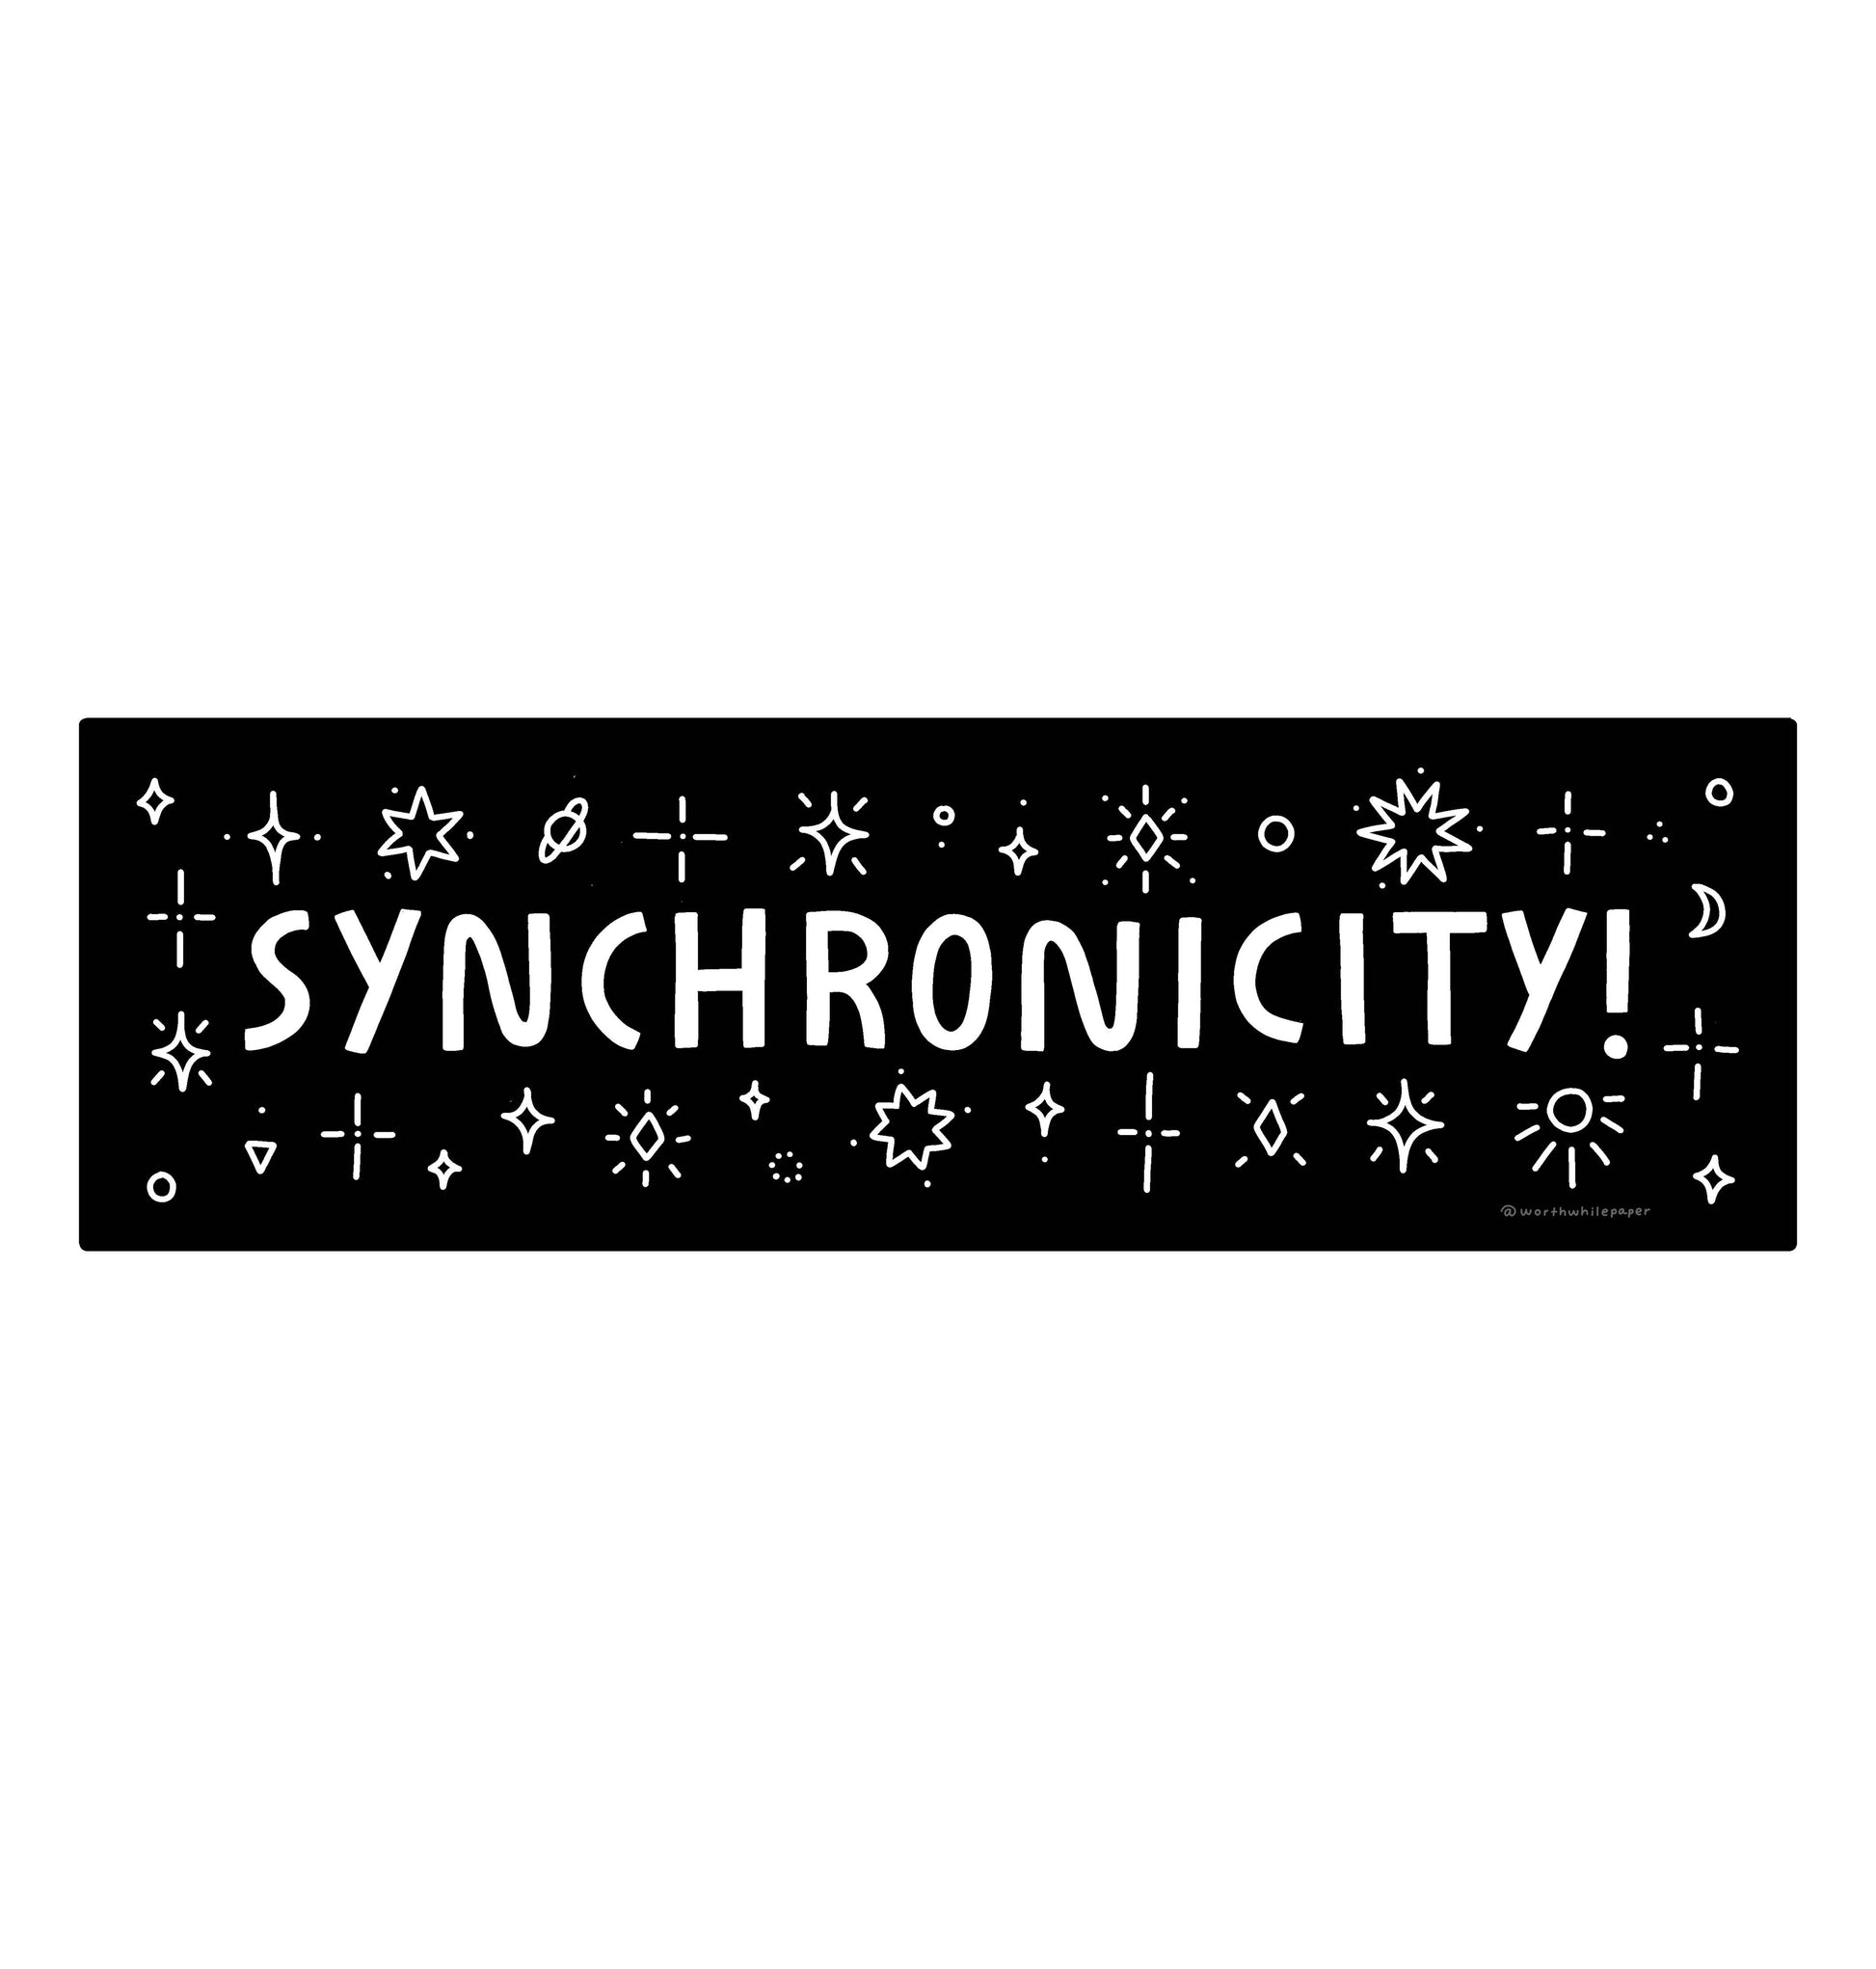 Synchronicity Sticker Worthwhile Paper 